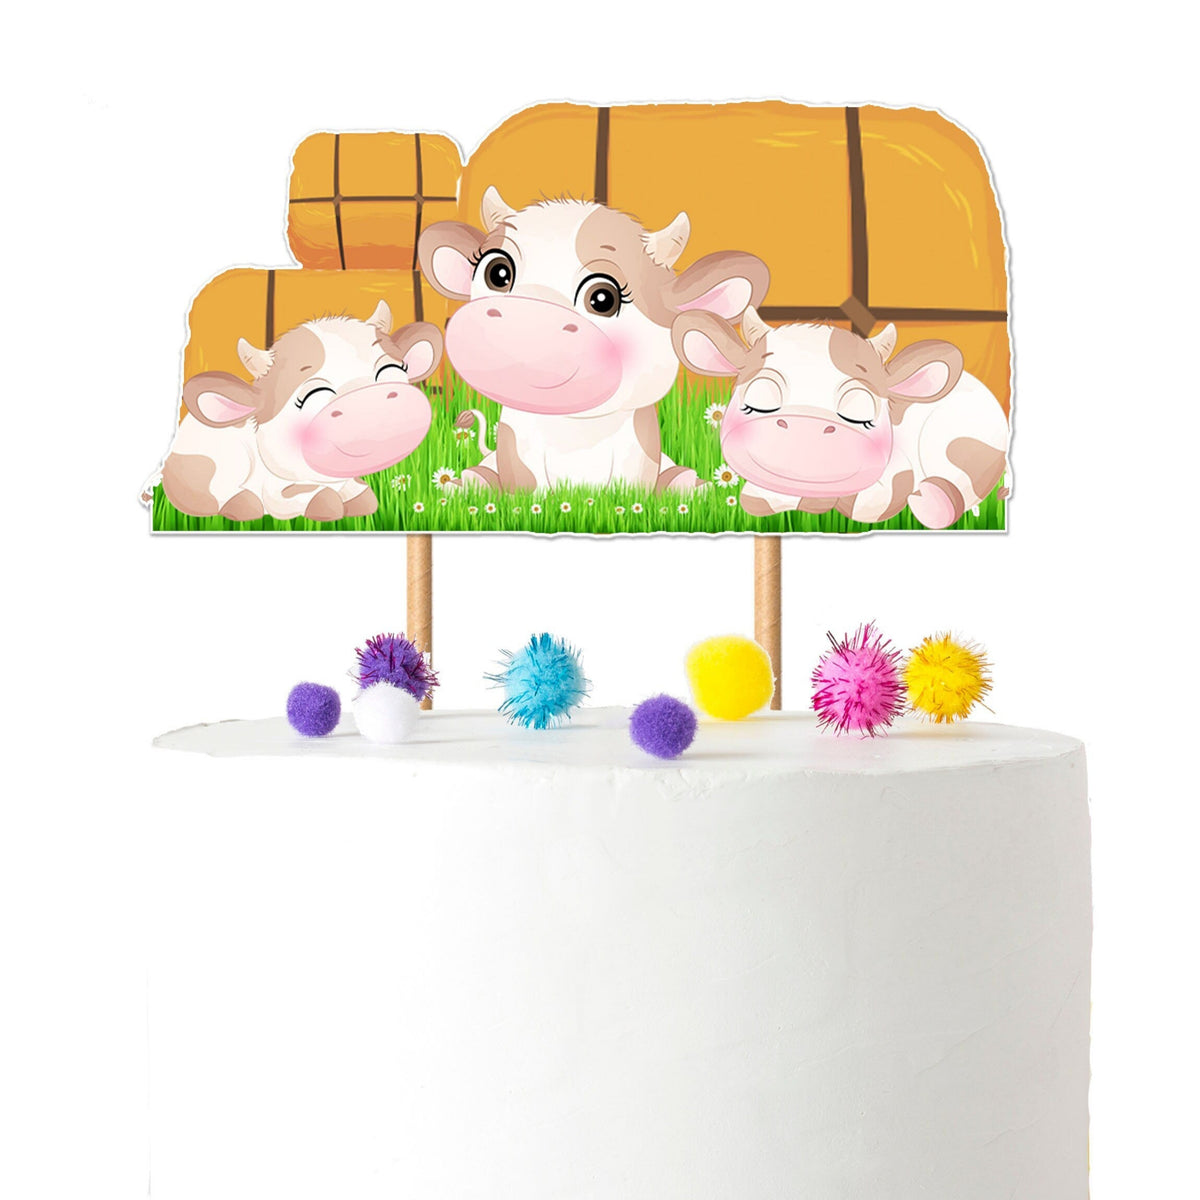 Adorable Cow Cake Topper – Perfect for Baby Showers and Birthday Parties